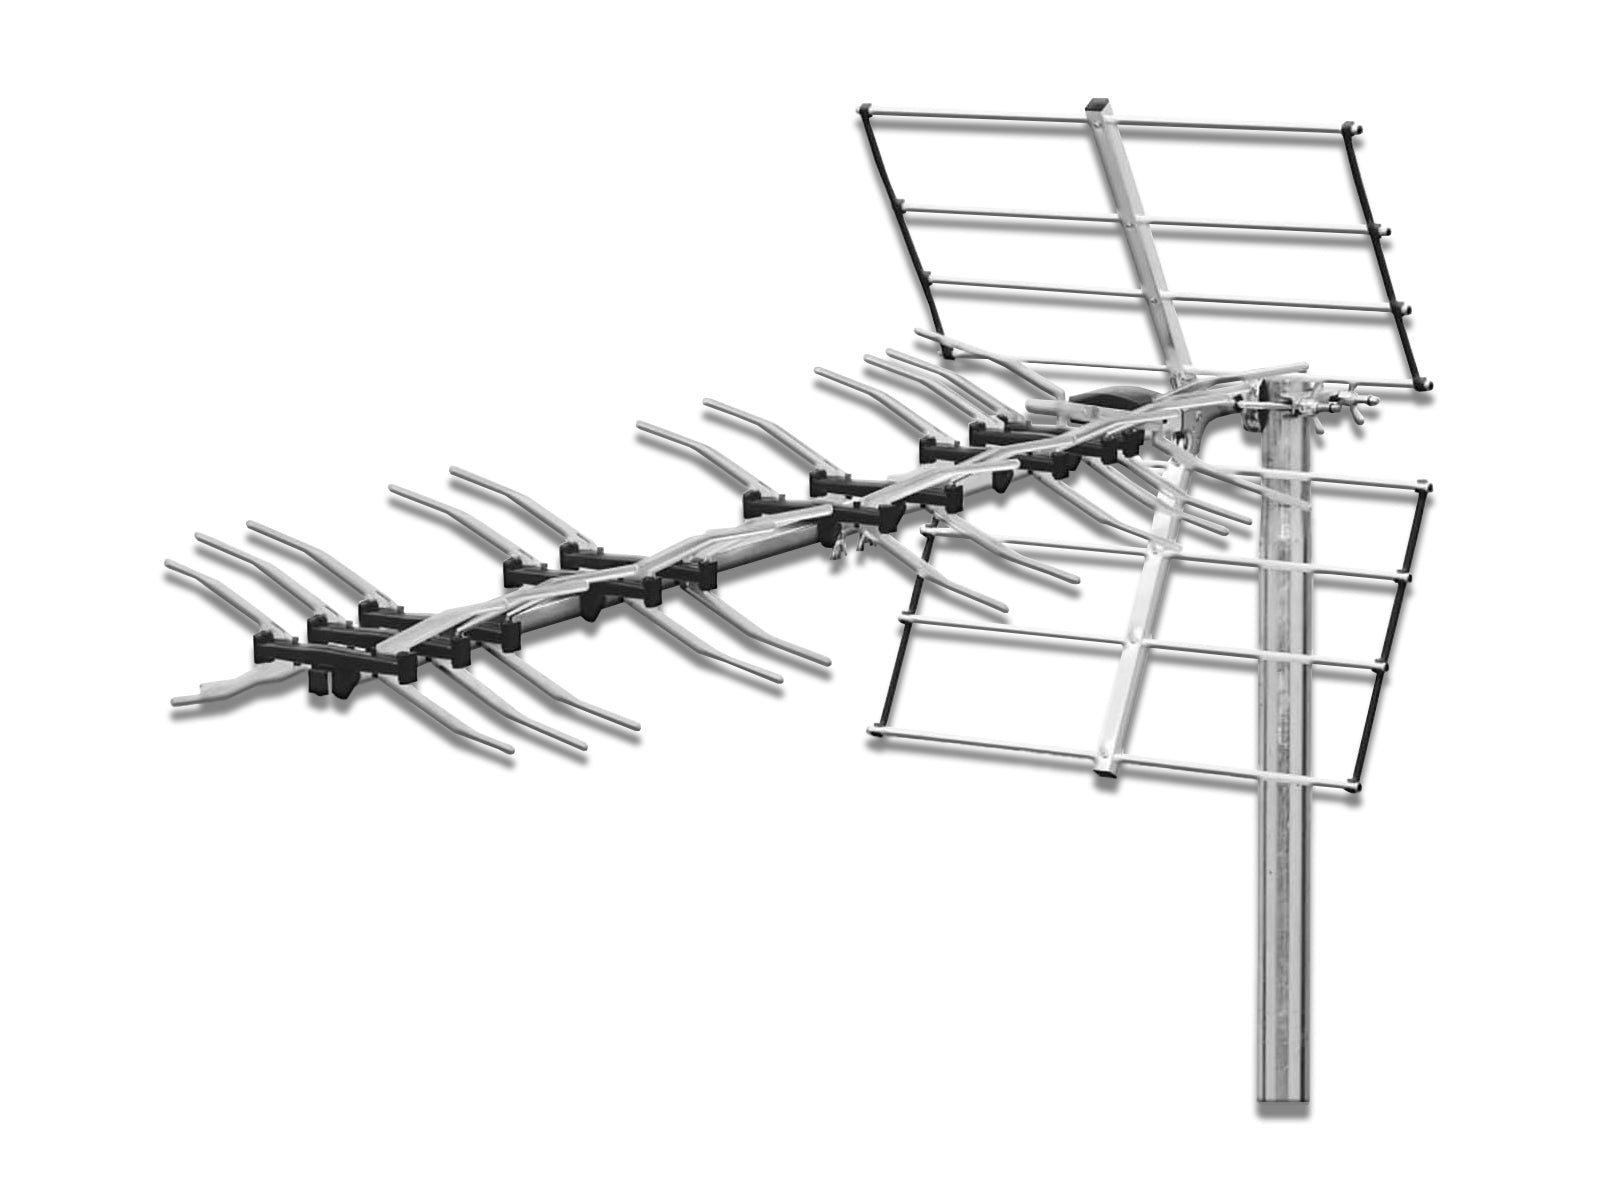 32 Element UHF TV Aerial Front Angled View